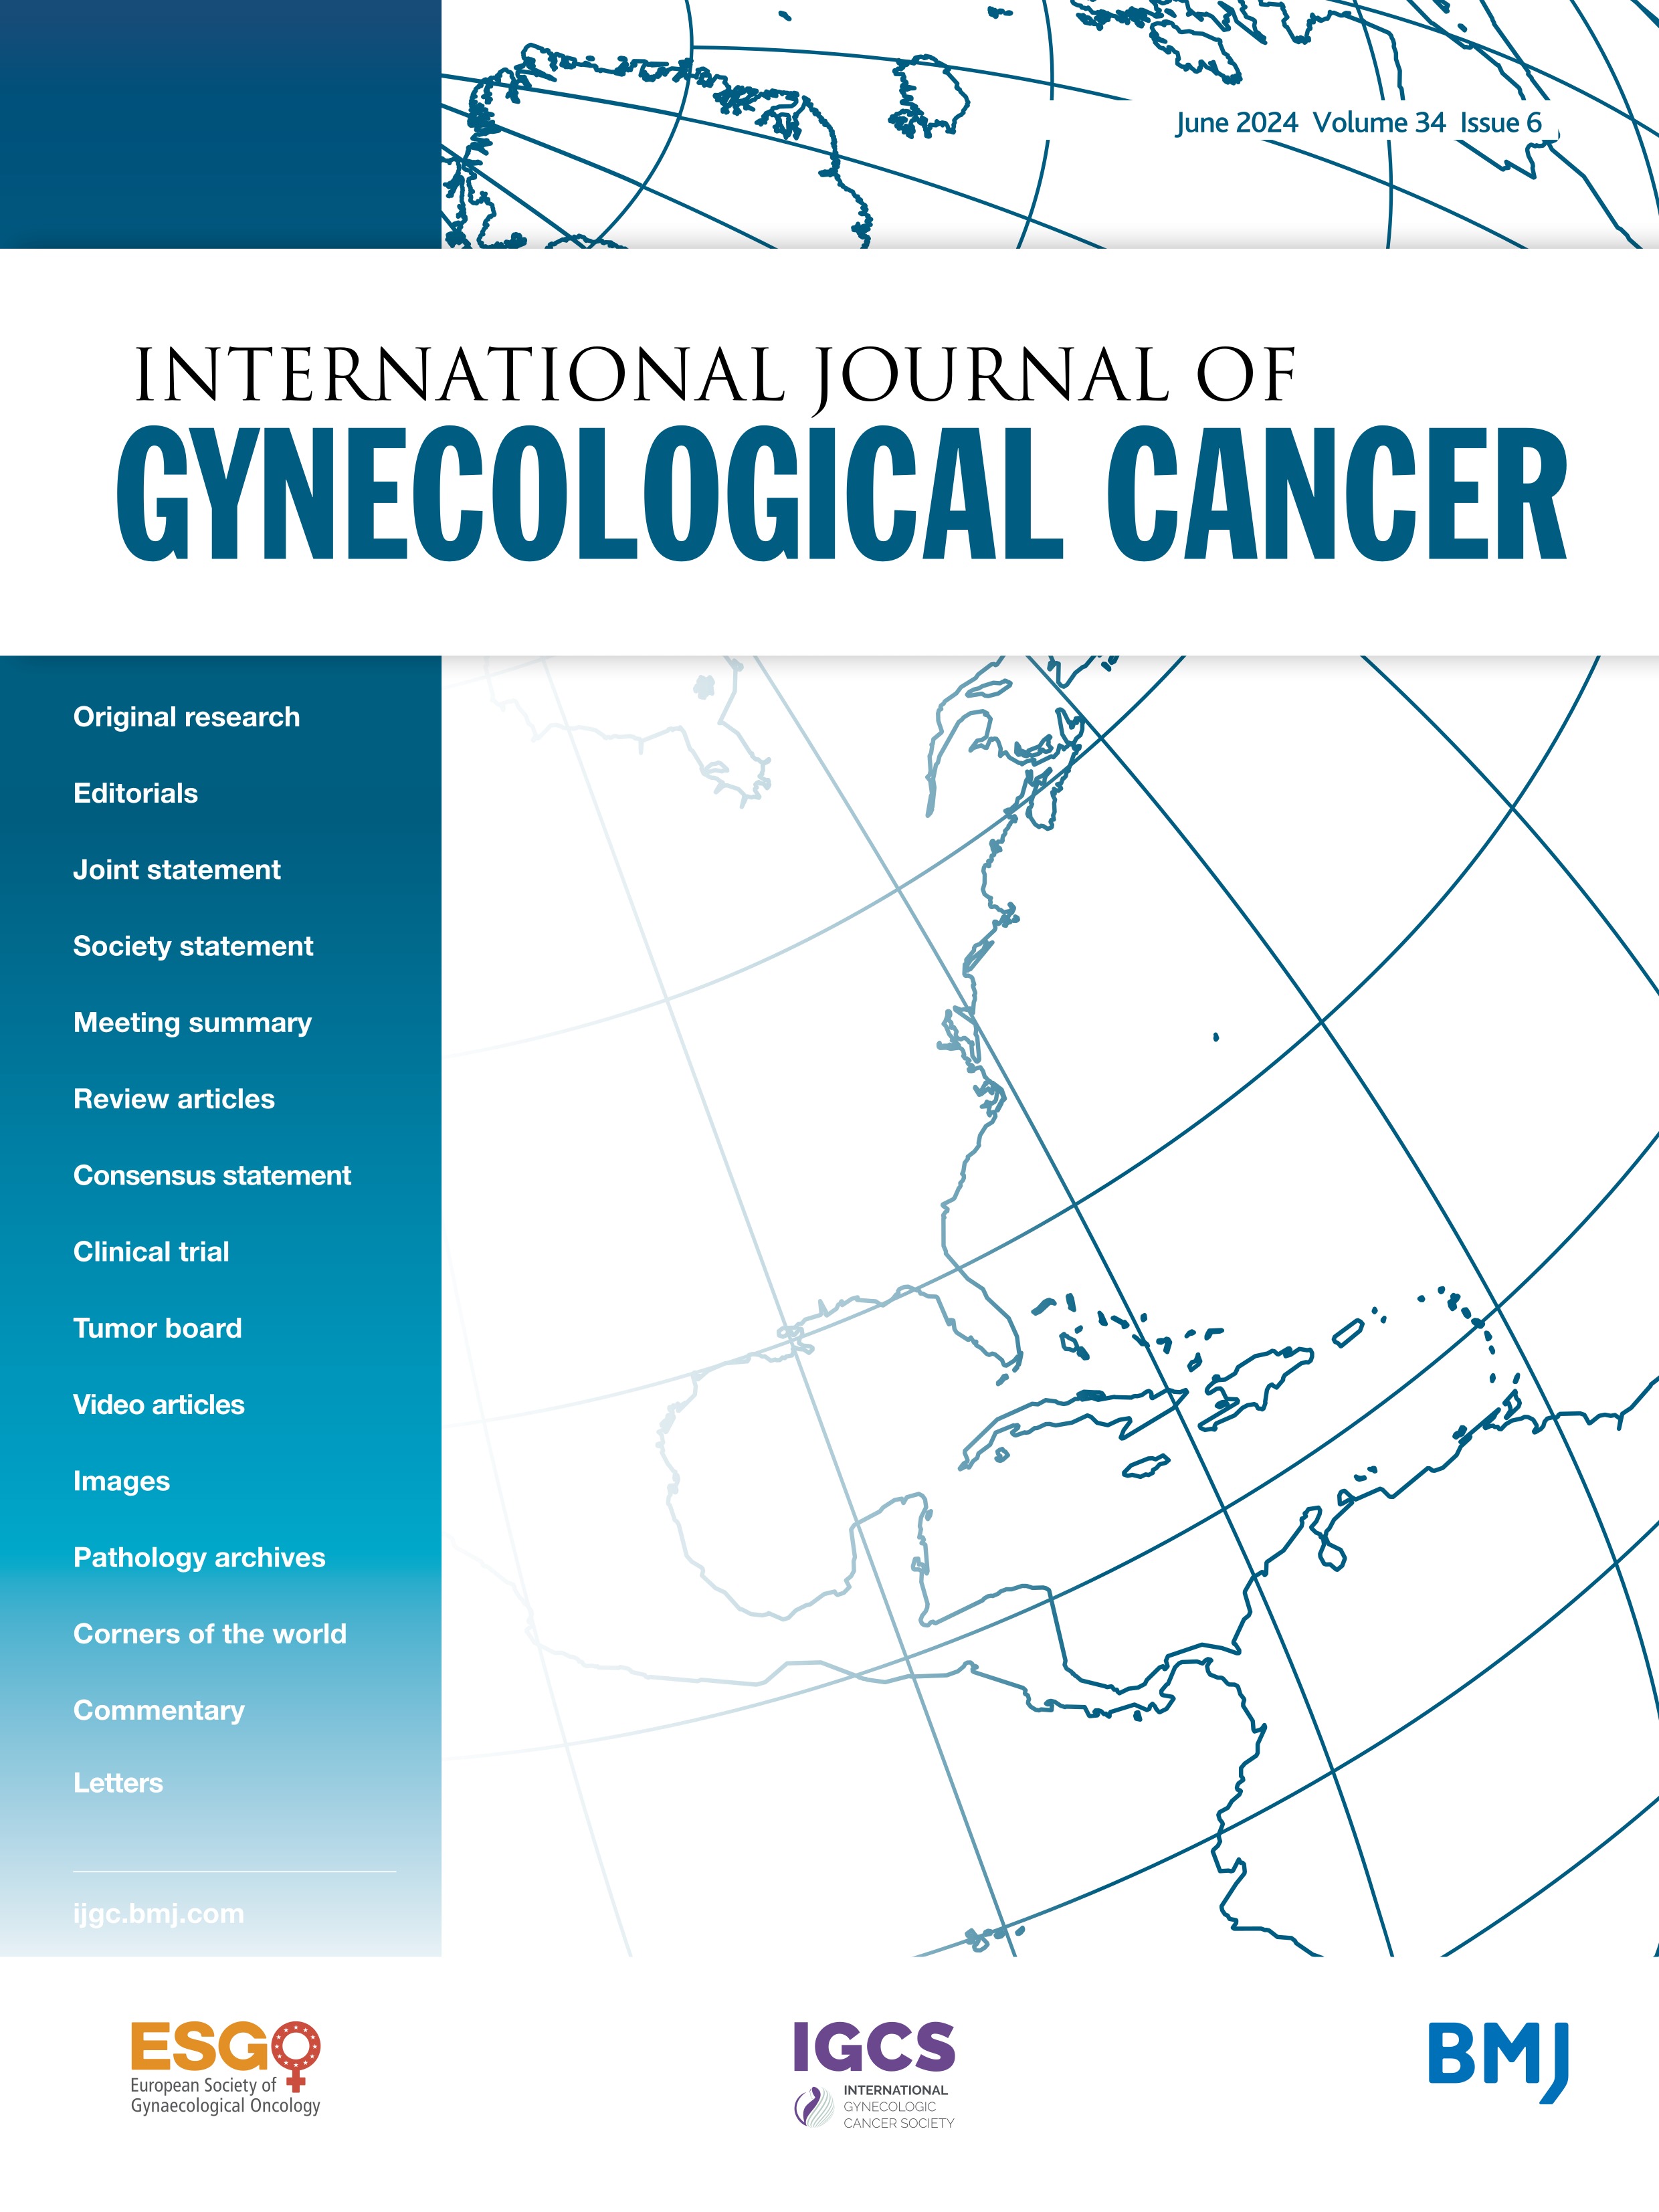 RECIST 1.1 versus clinico-radiological response assessment for locally advanced cervical cancer: implications on interpreting survival outcomes of future trials